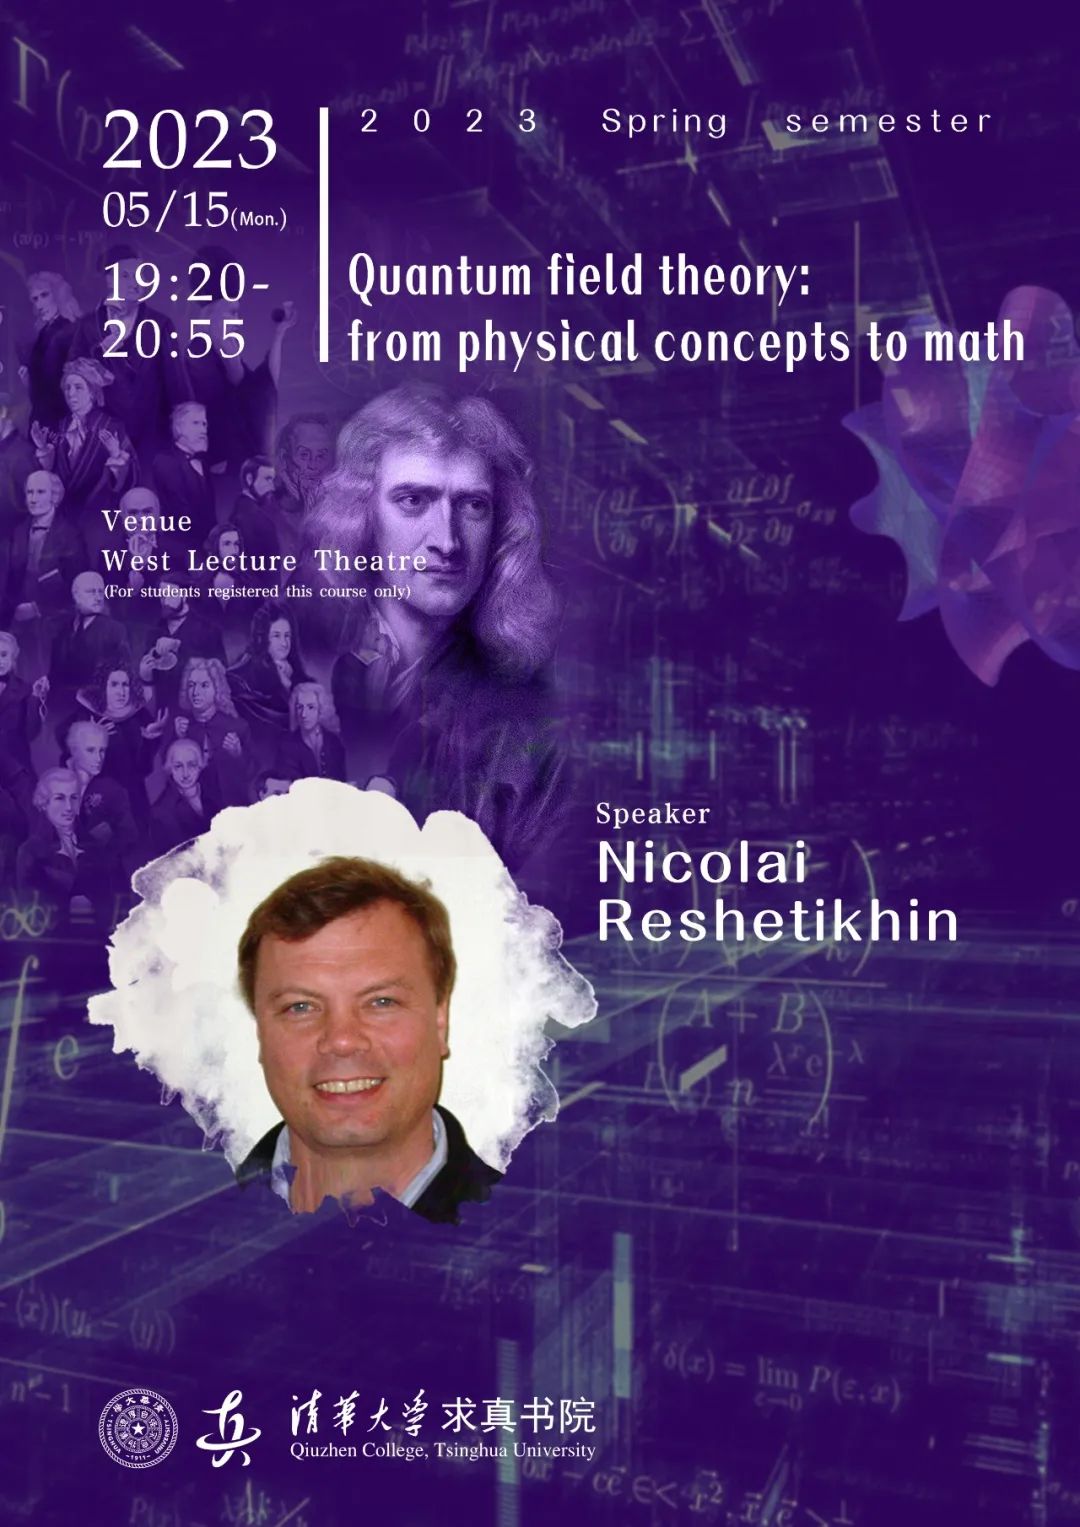 Quantum field theory: from physical concepts to math